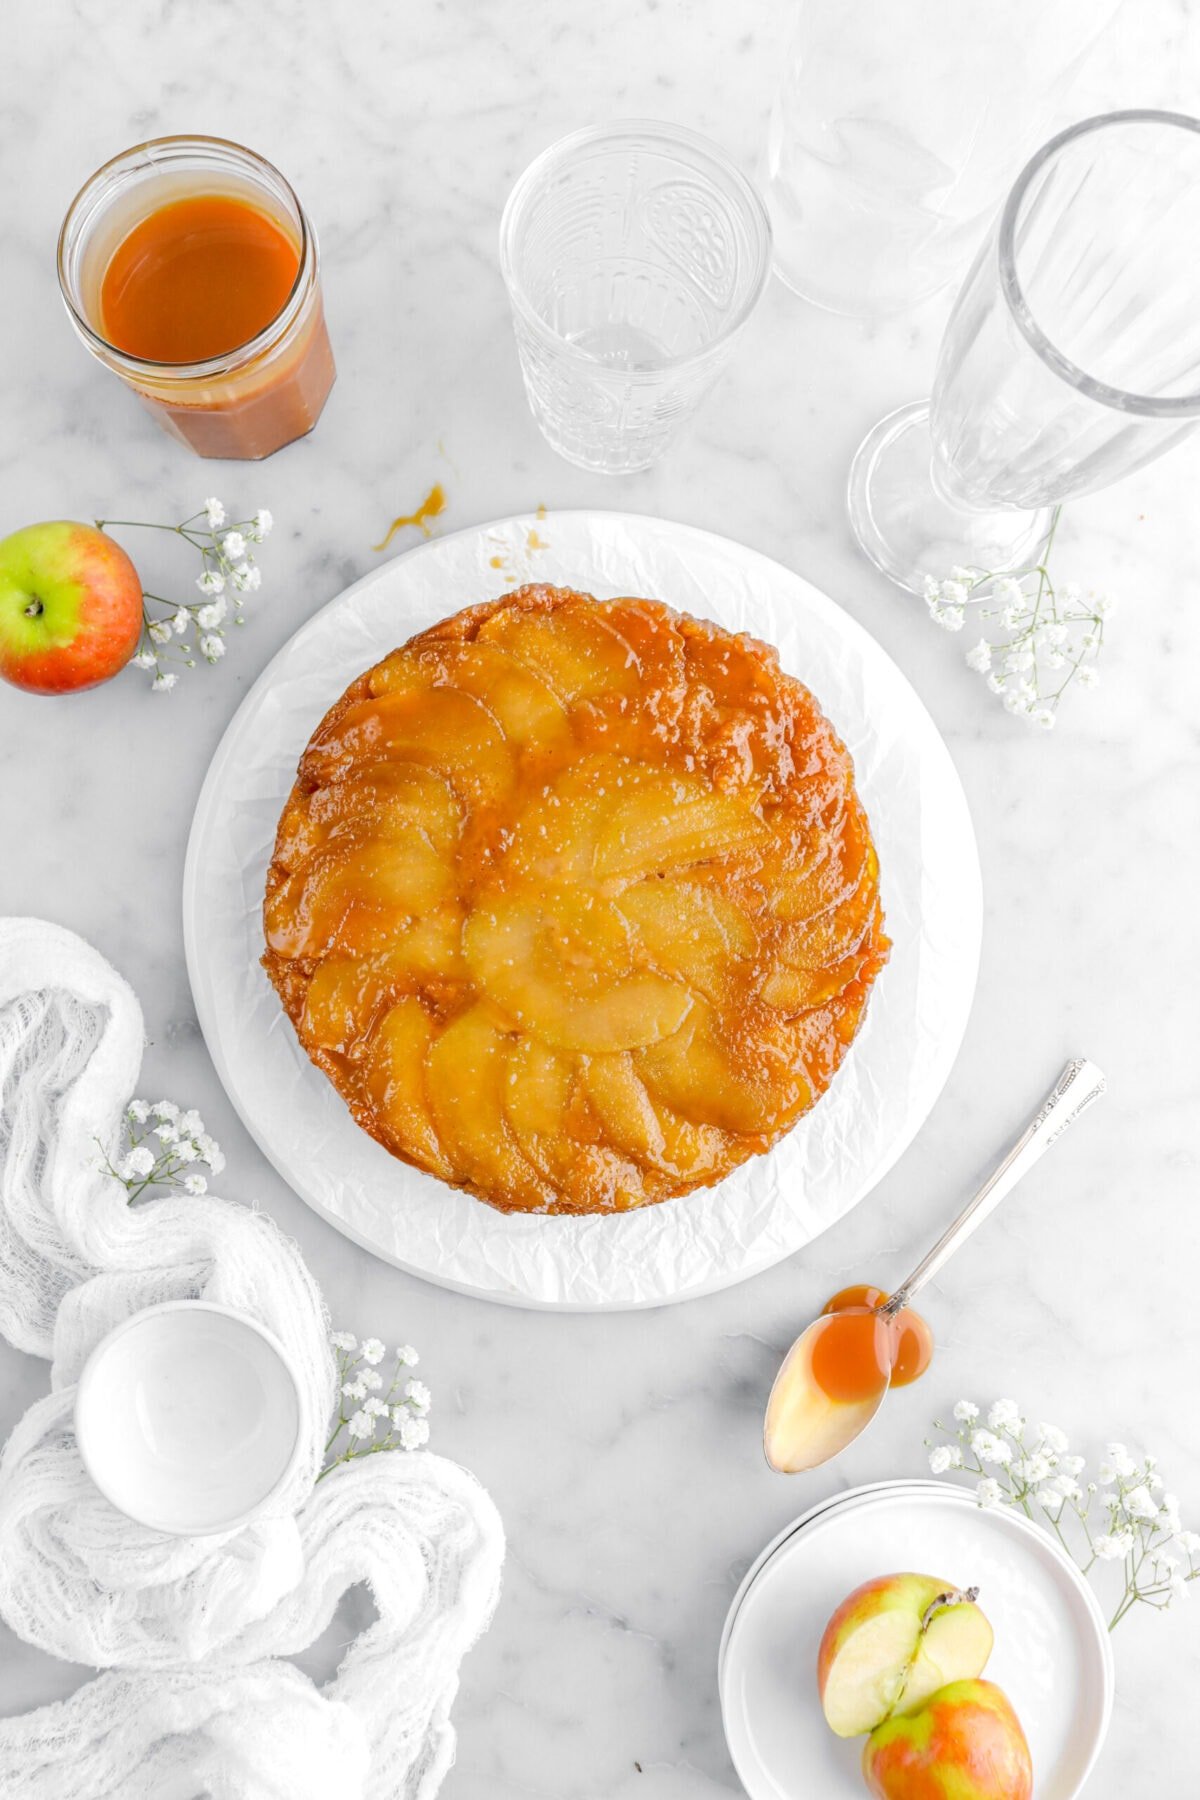 caramel apple upside down cake on parchment paper with spoon and jar of caramel beside, apples, flowers, and empty glasses around on marble surface.